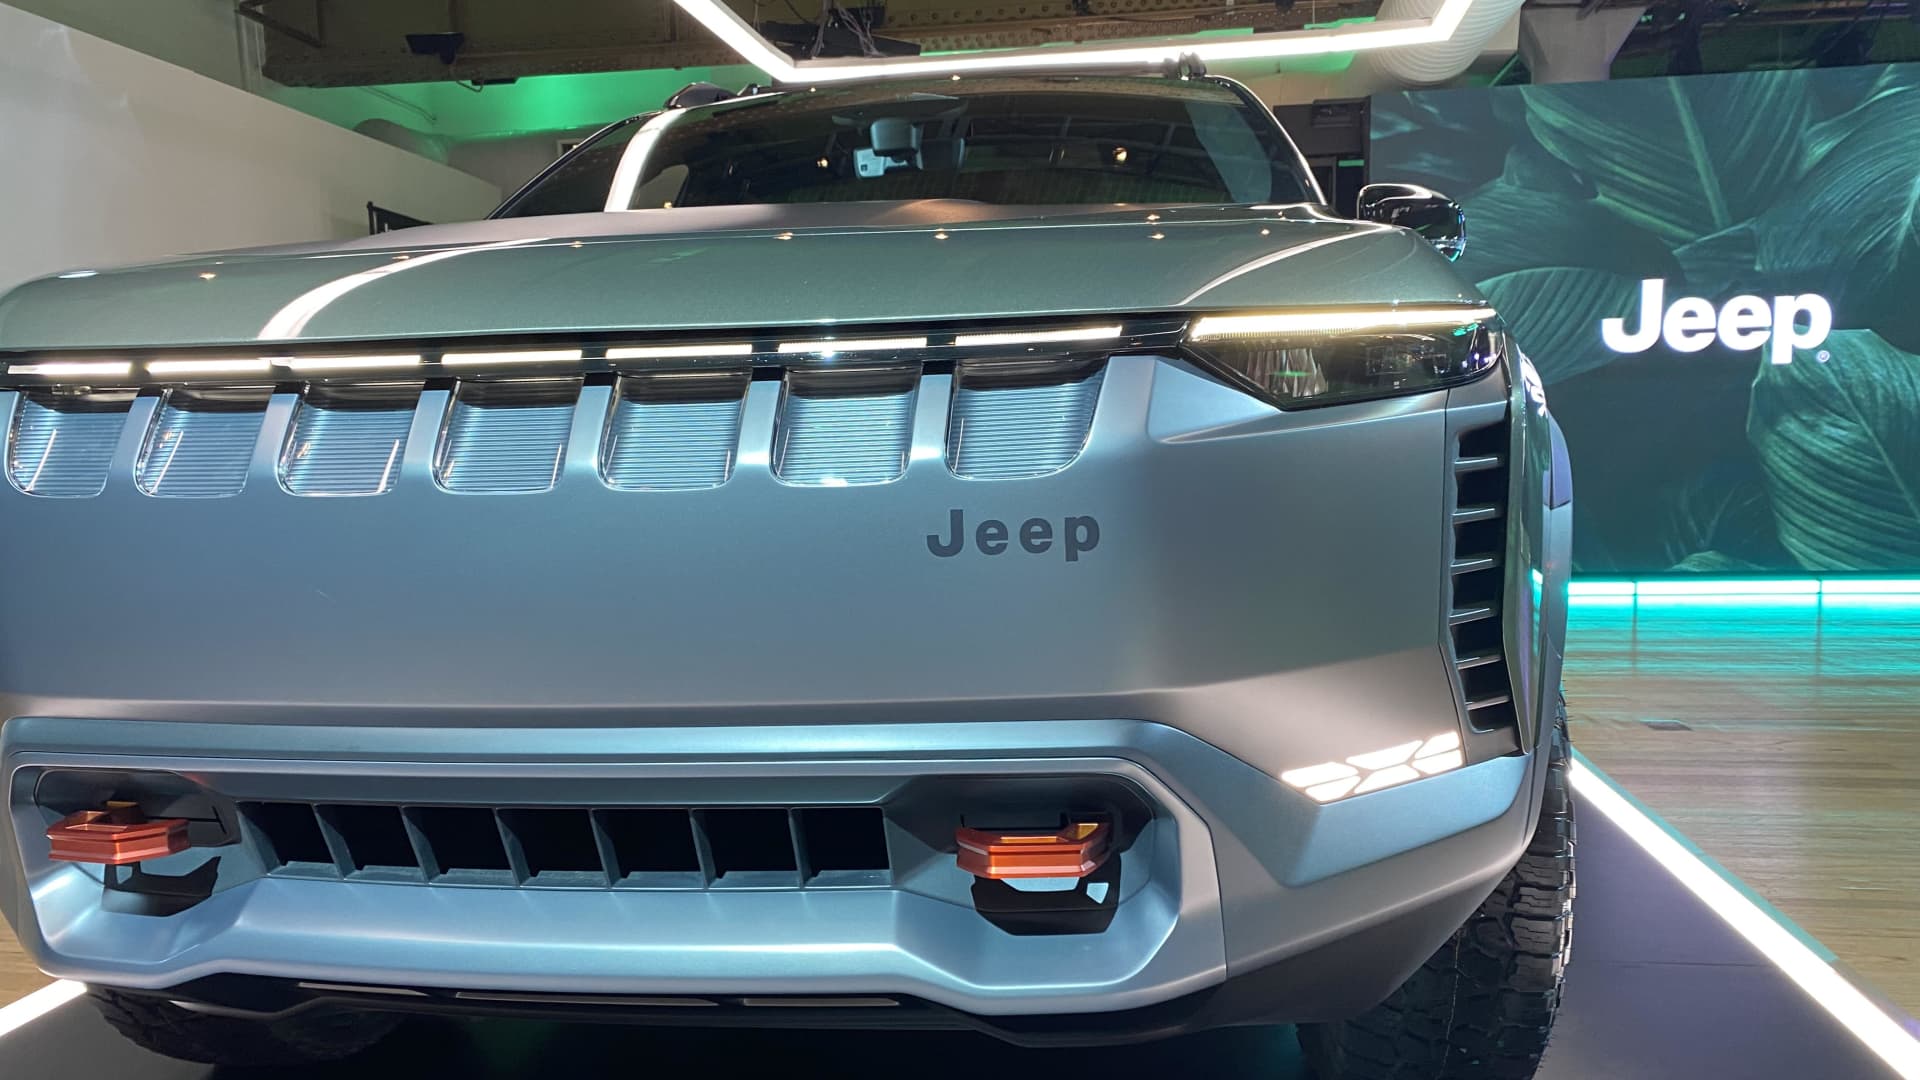 Jeep sales are expected to grow 50% by 2027